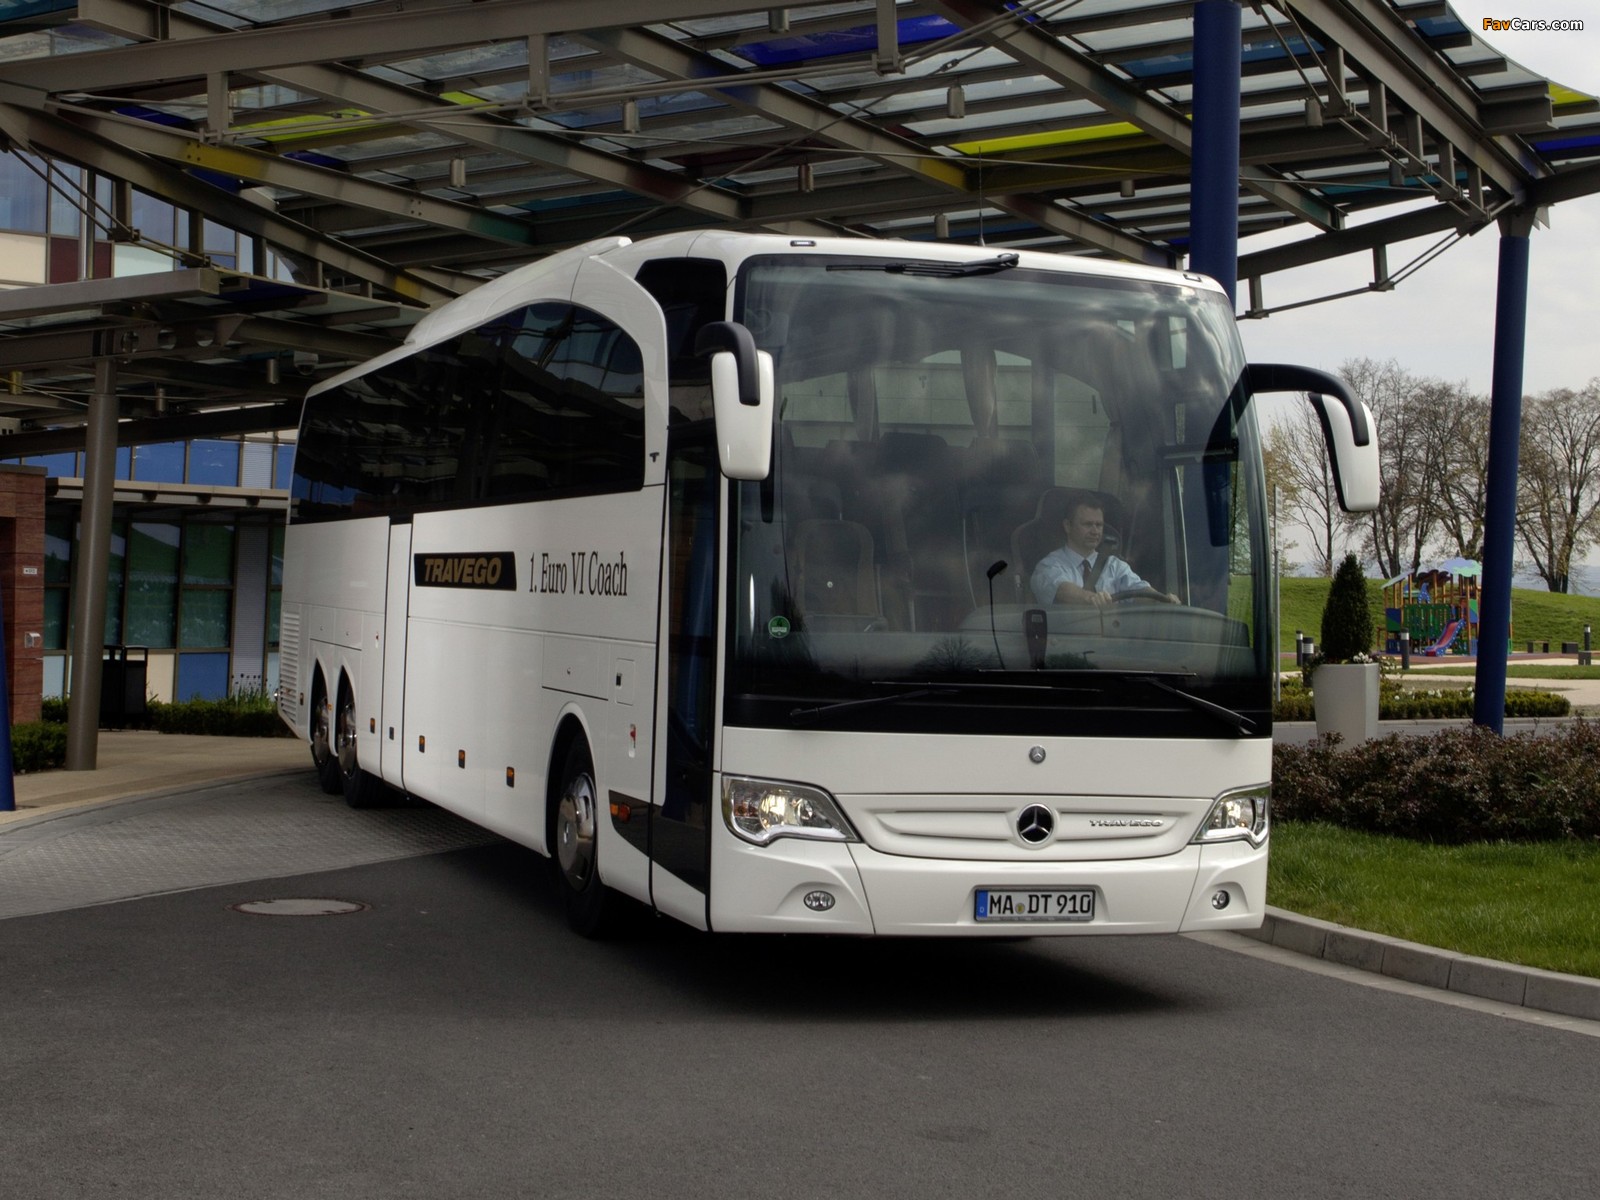 Mercedes-Benz Travego Edition 1 (O580) 2011 pictures (1600 x 1200)